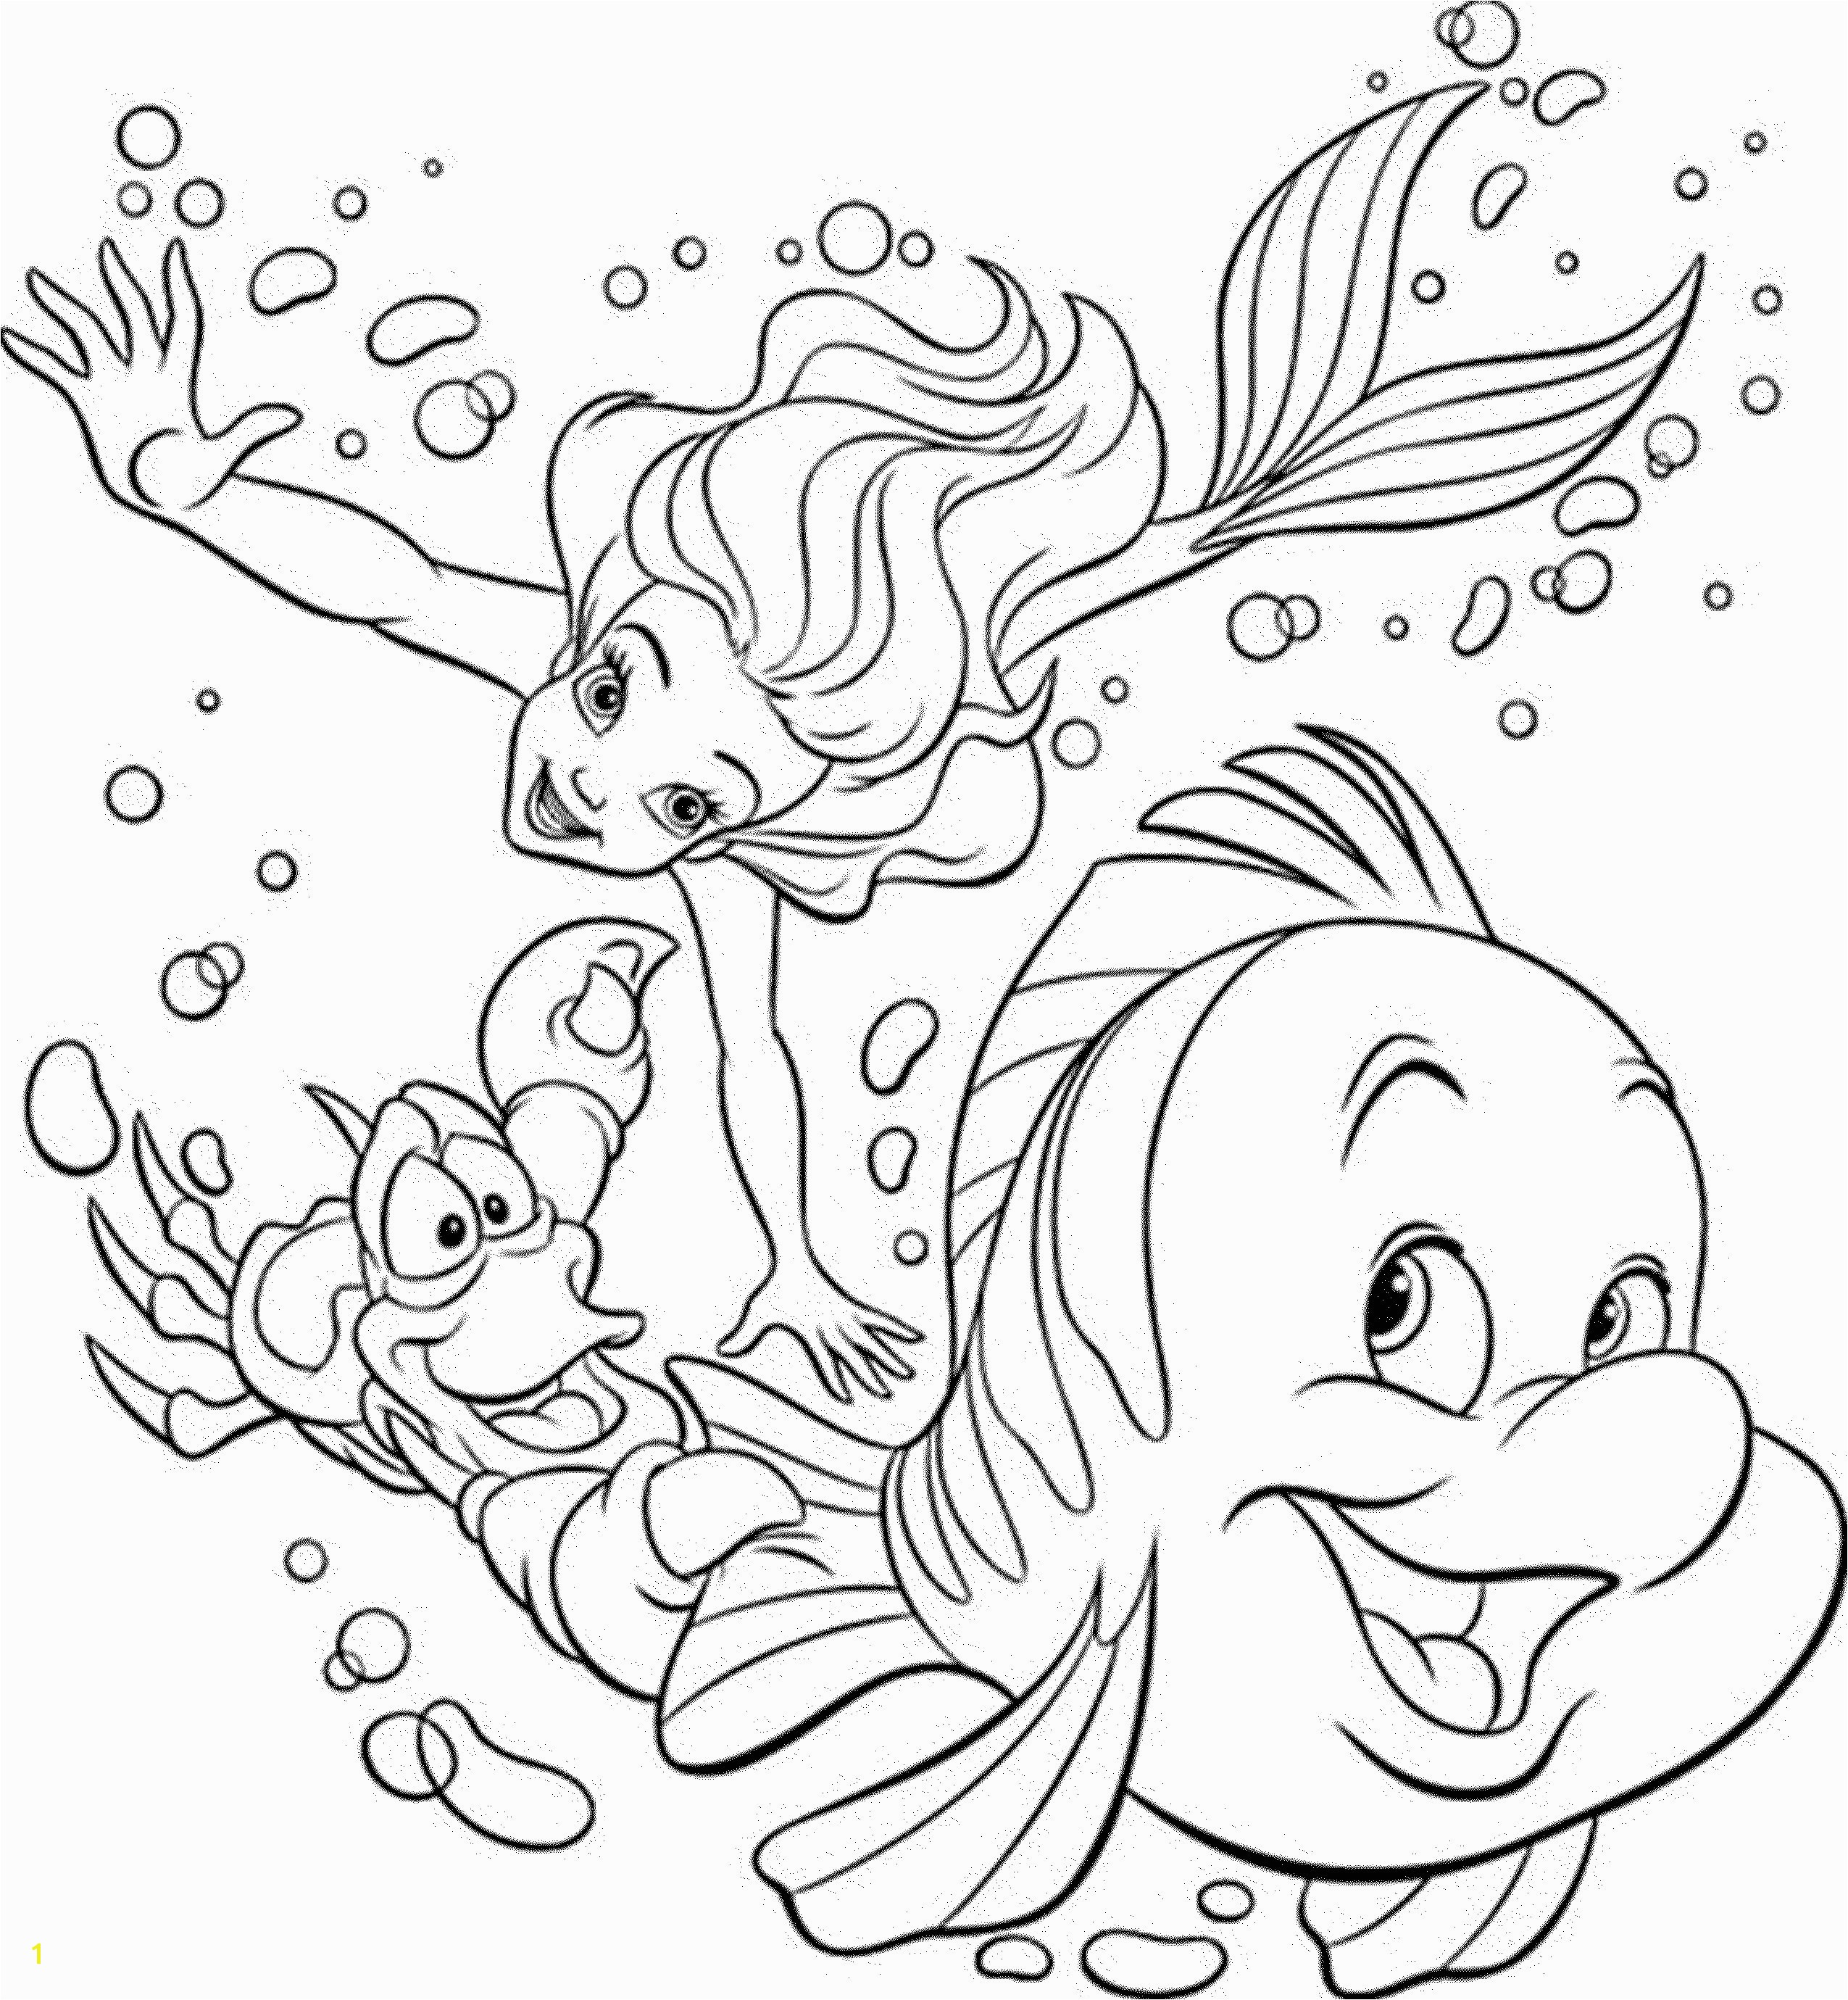 Gallery of pistol pete coloring page